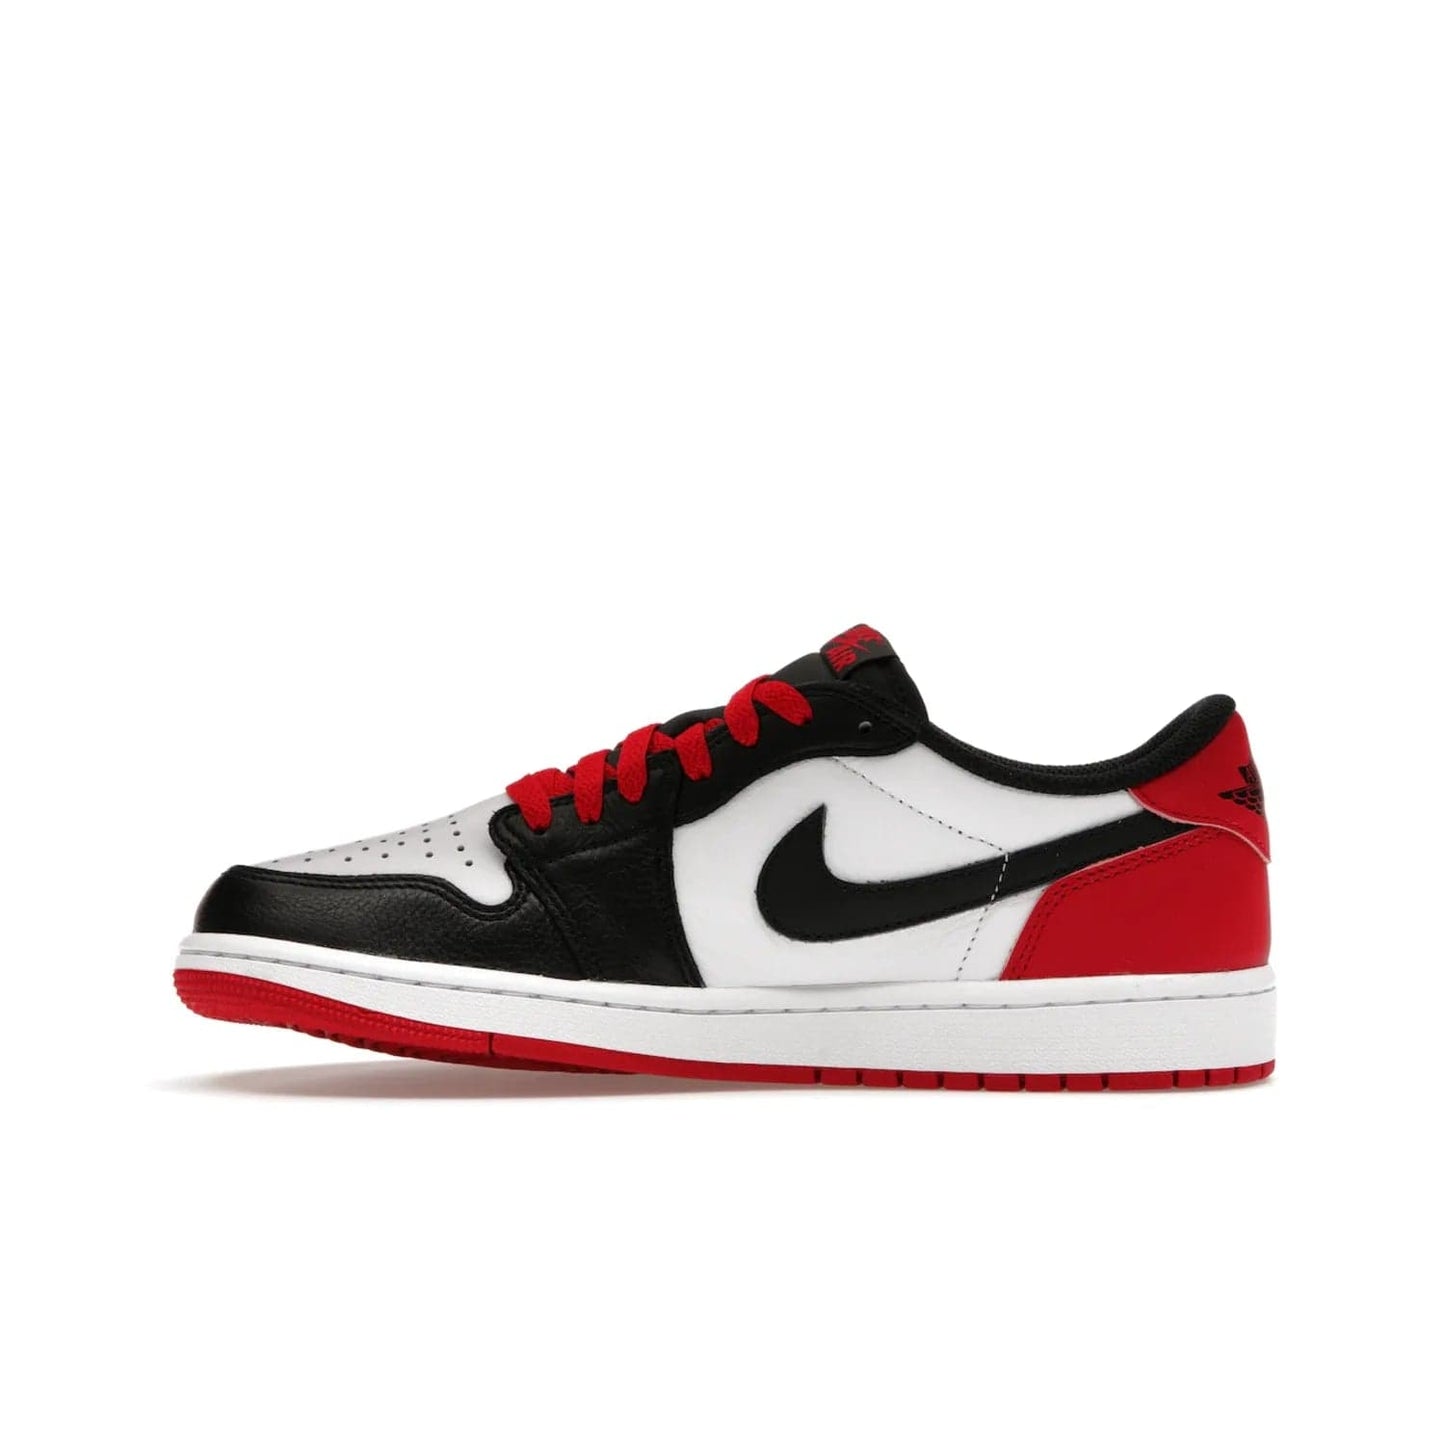 Jordan 1 Retro Low OG Black Toe (2023) - Image 19 - Only at www.BallersClubKickz.com - Upgrade your wardrobe with the Jordan 1 Retro Low OG Black Toe featuring a classic black and white upper and dynamic red heel counter. Eye-catching white midsole and iconic black Swoosh and Wings complete the timeless yet modern look. Shop now to own this iconic shoe!